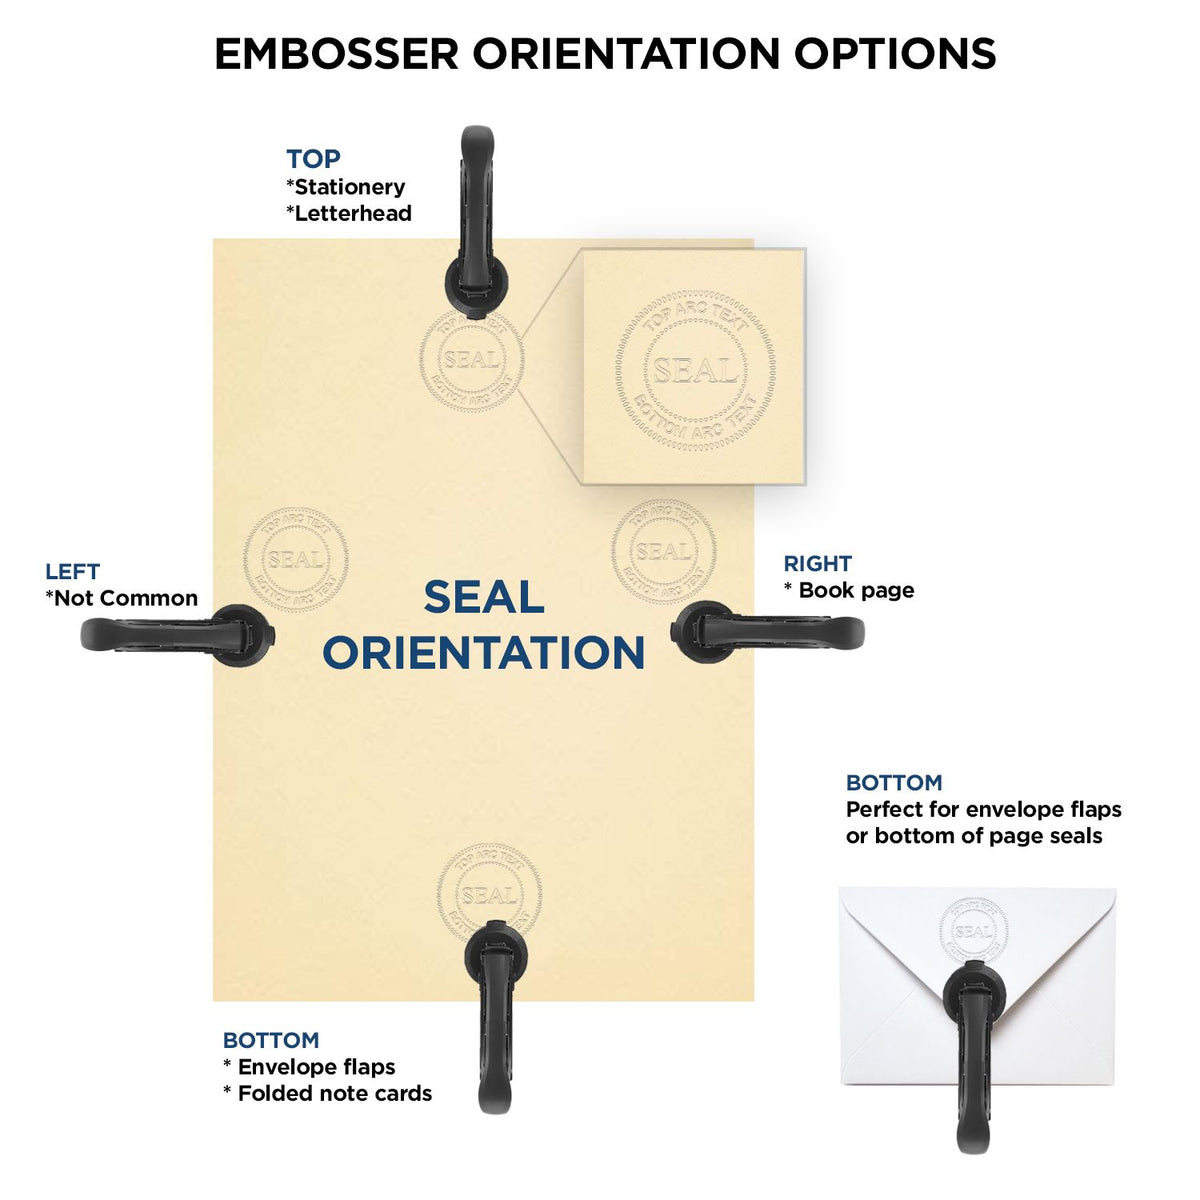 An infographic for the State of Missouri Extended Long Reach Engineer Seal showing embosser orientation, this is showing examples of a top, bottom, right and left insert.